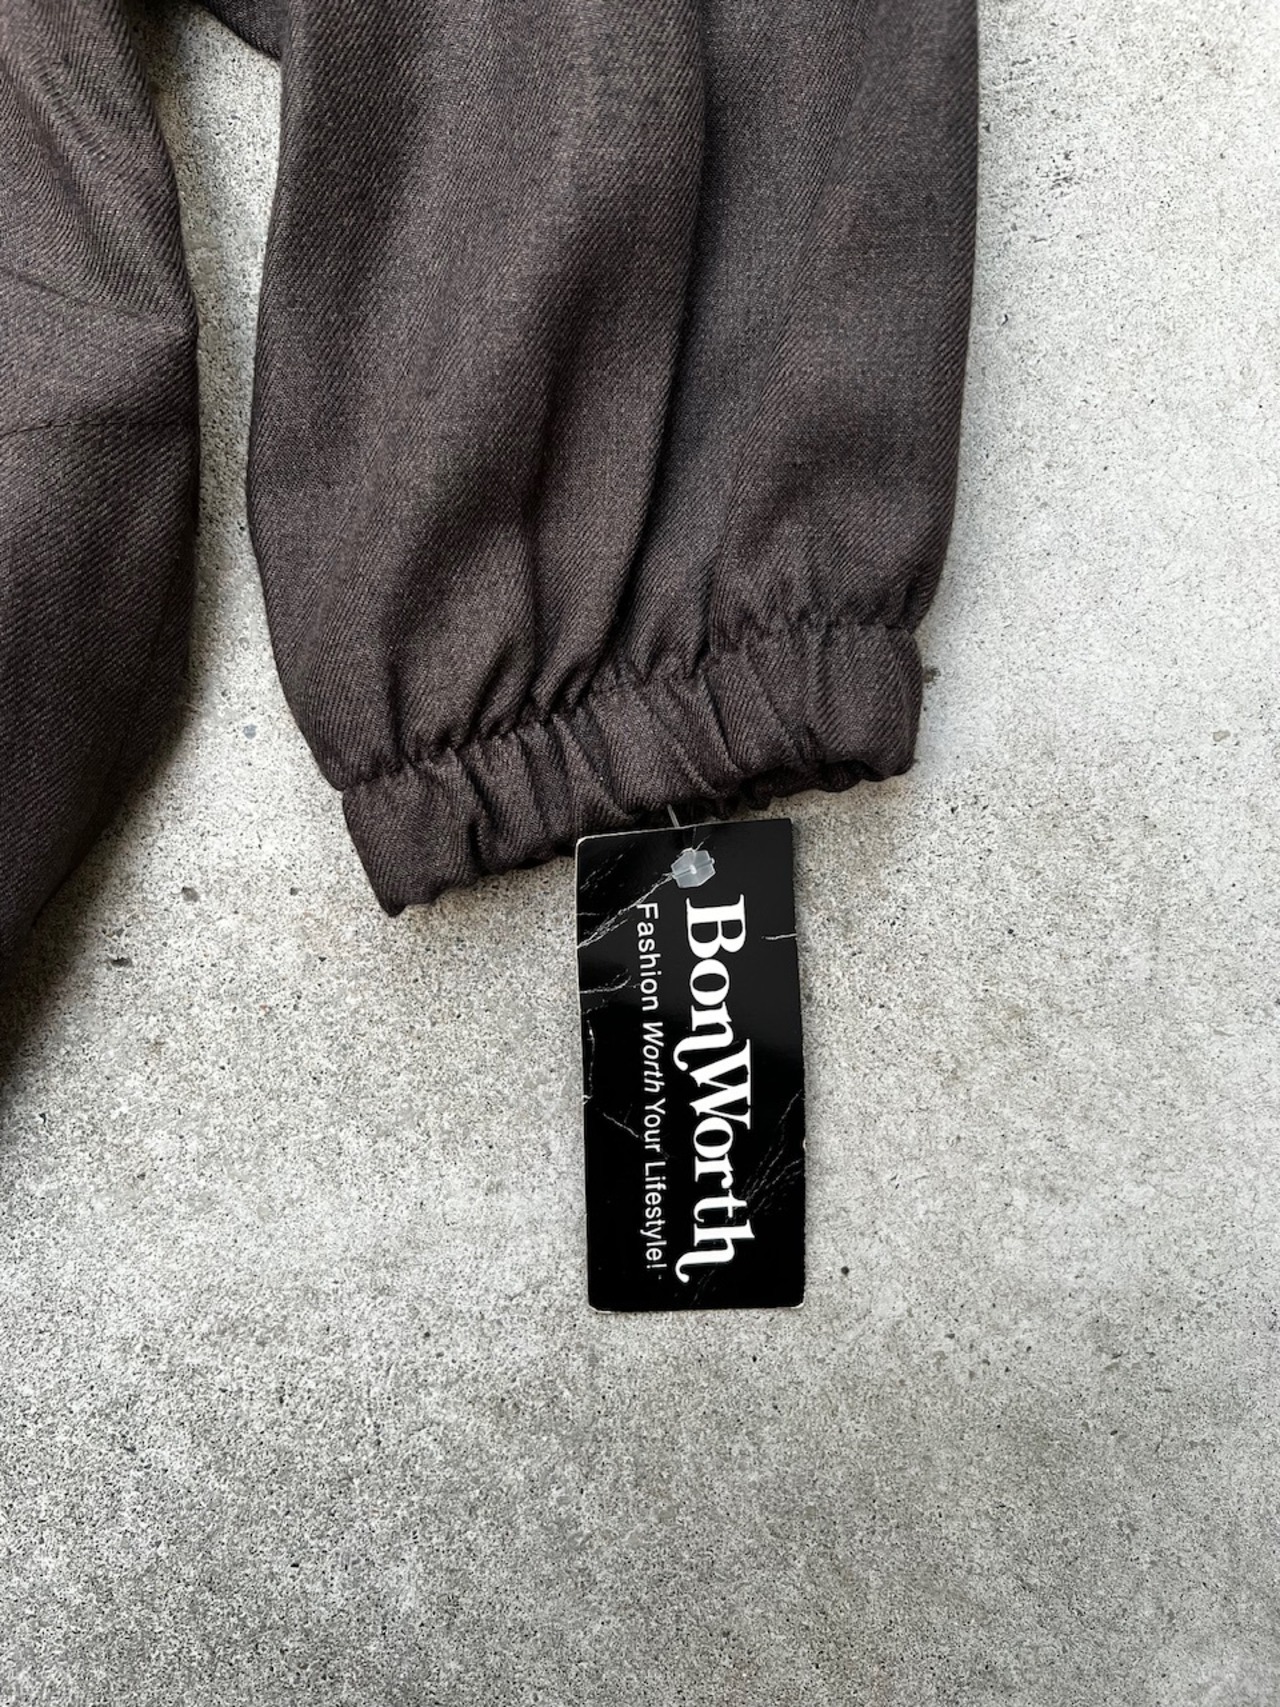 "Made In USA" Brown Zip Jacket